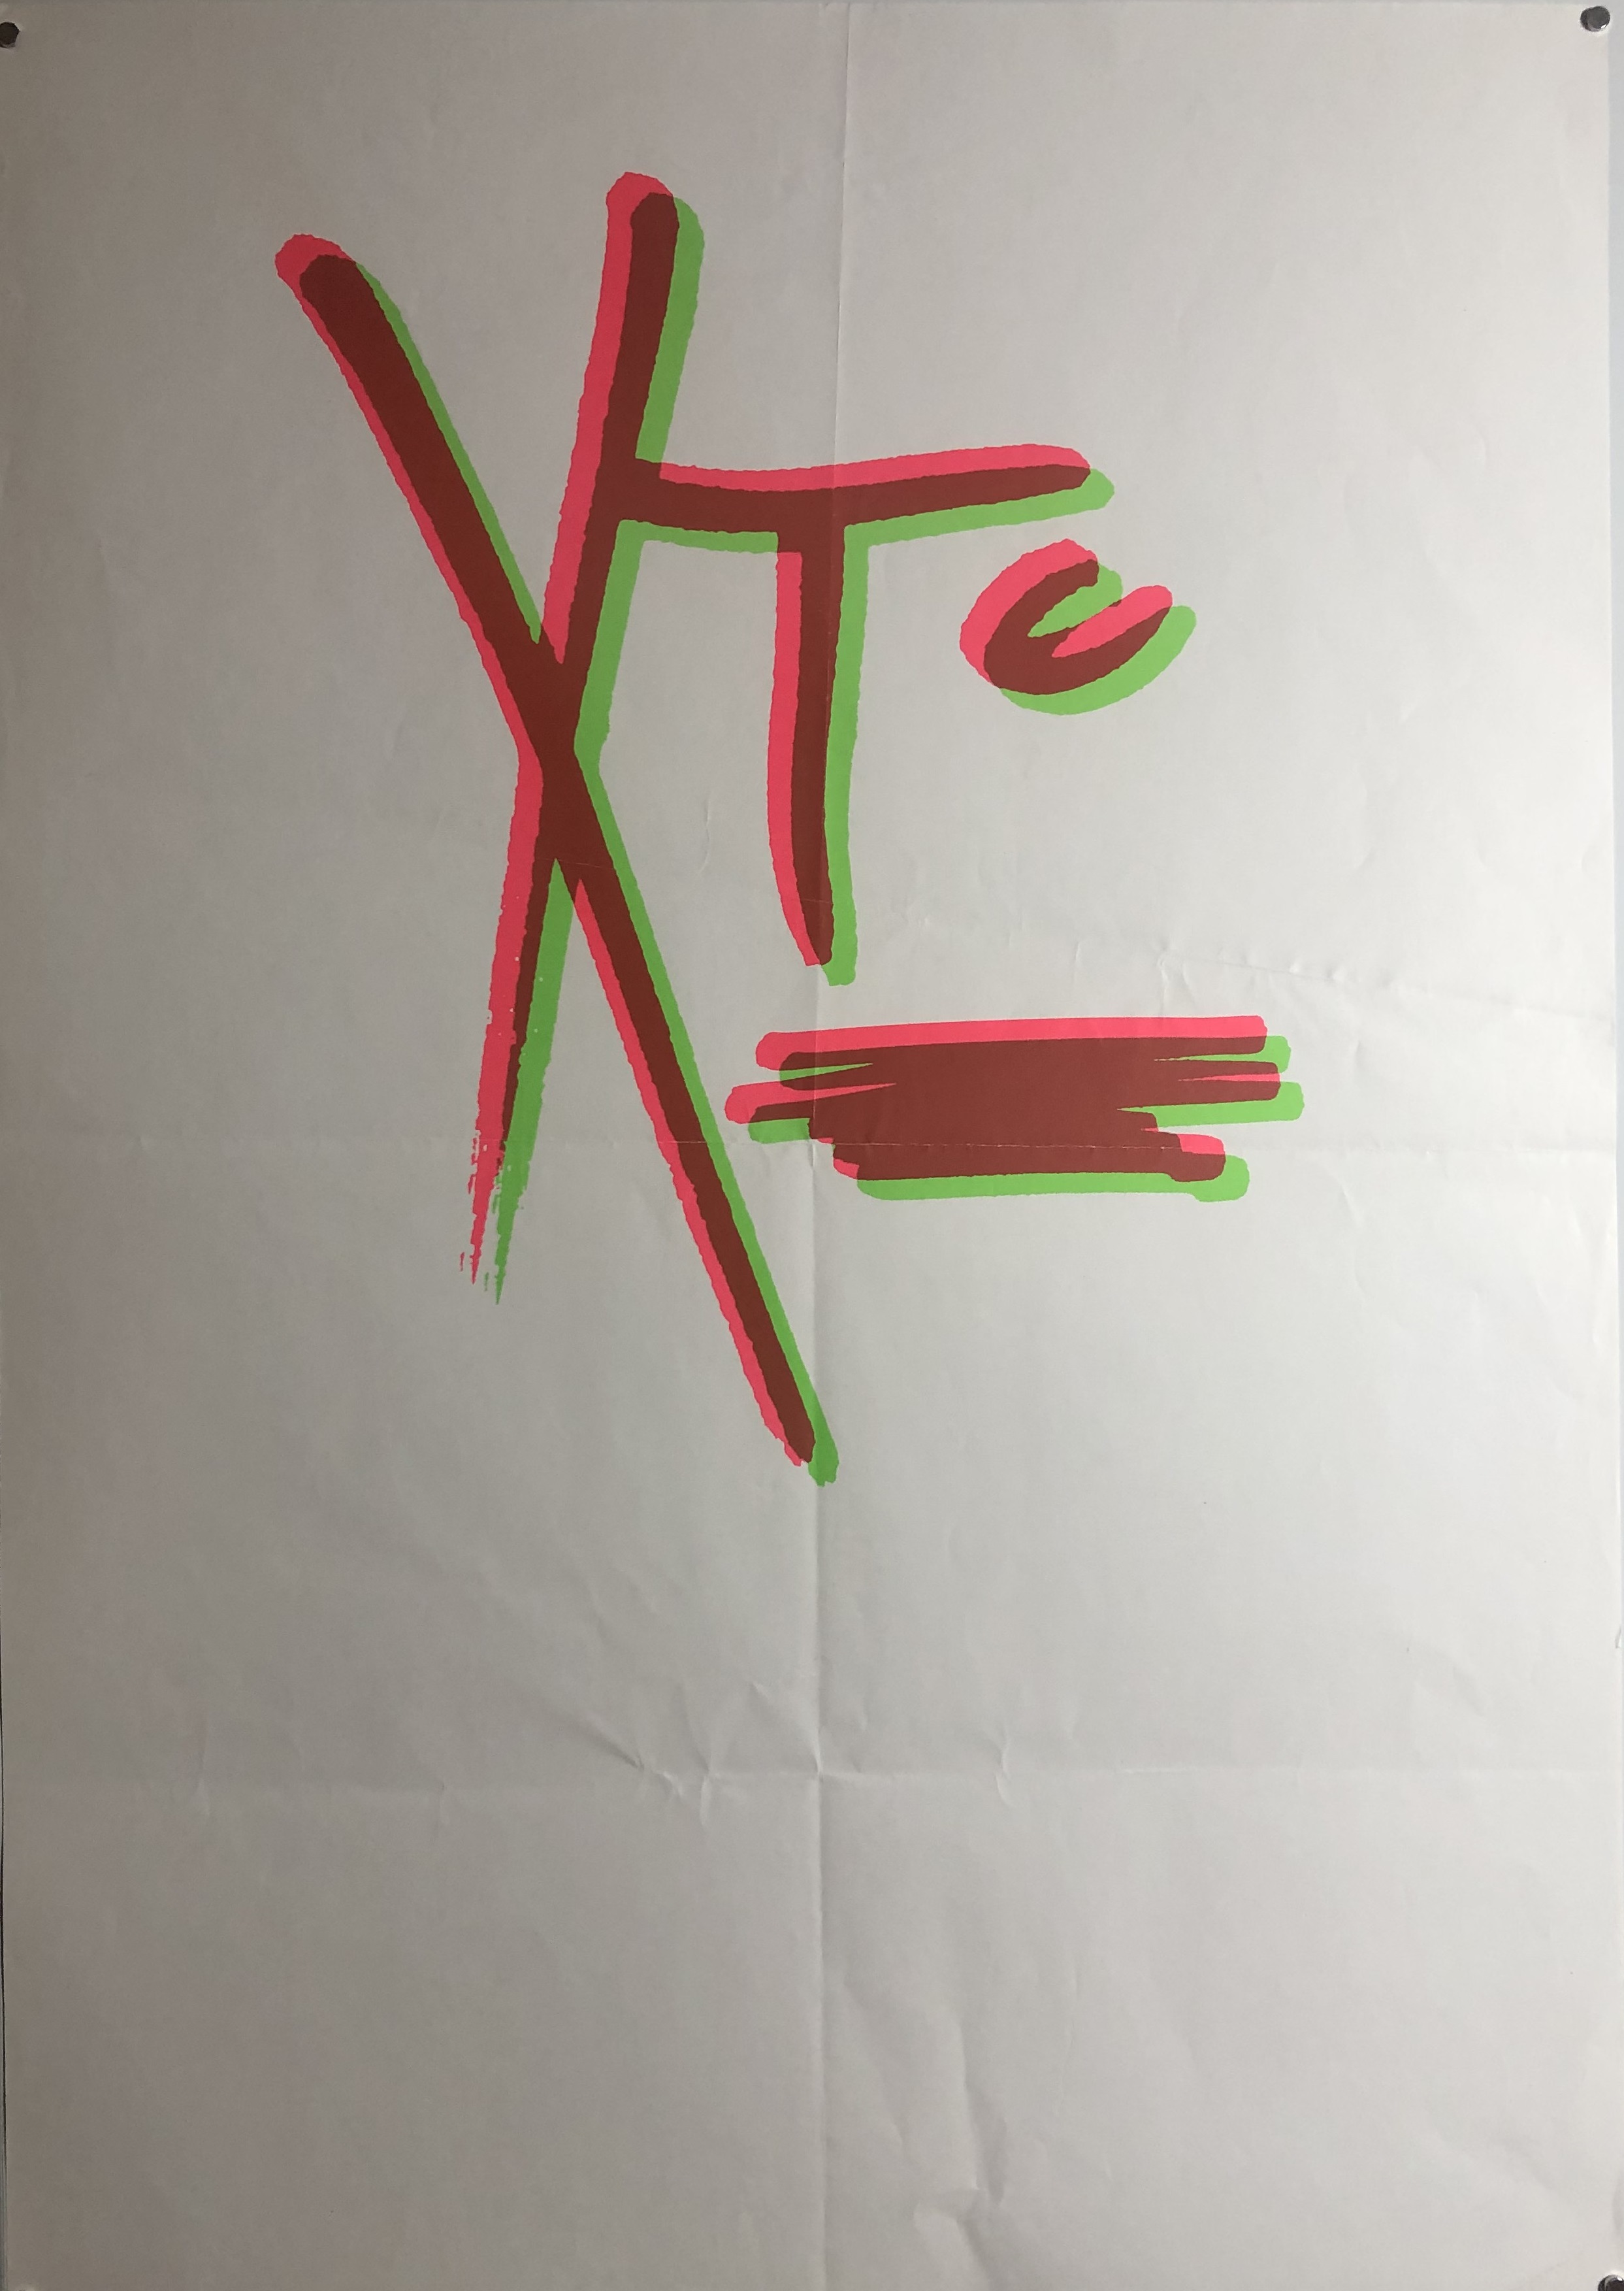 XTC POSTERS. - Image 6 of 8